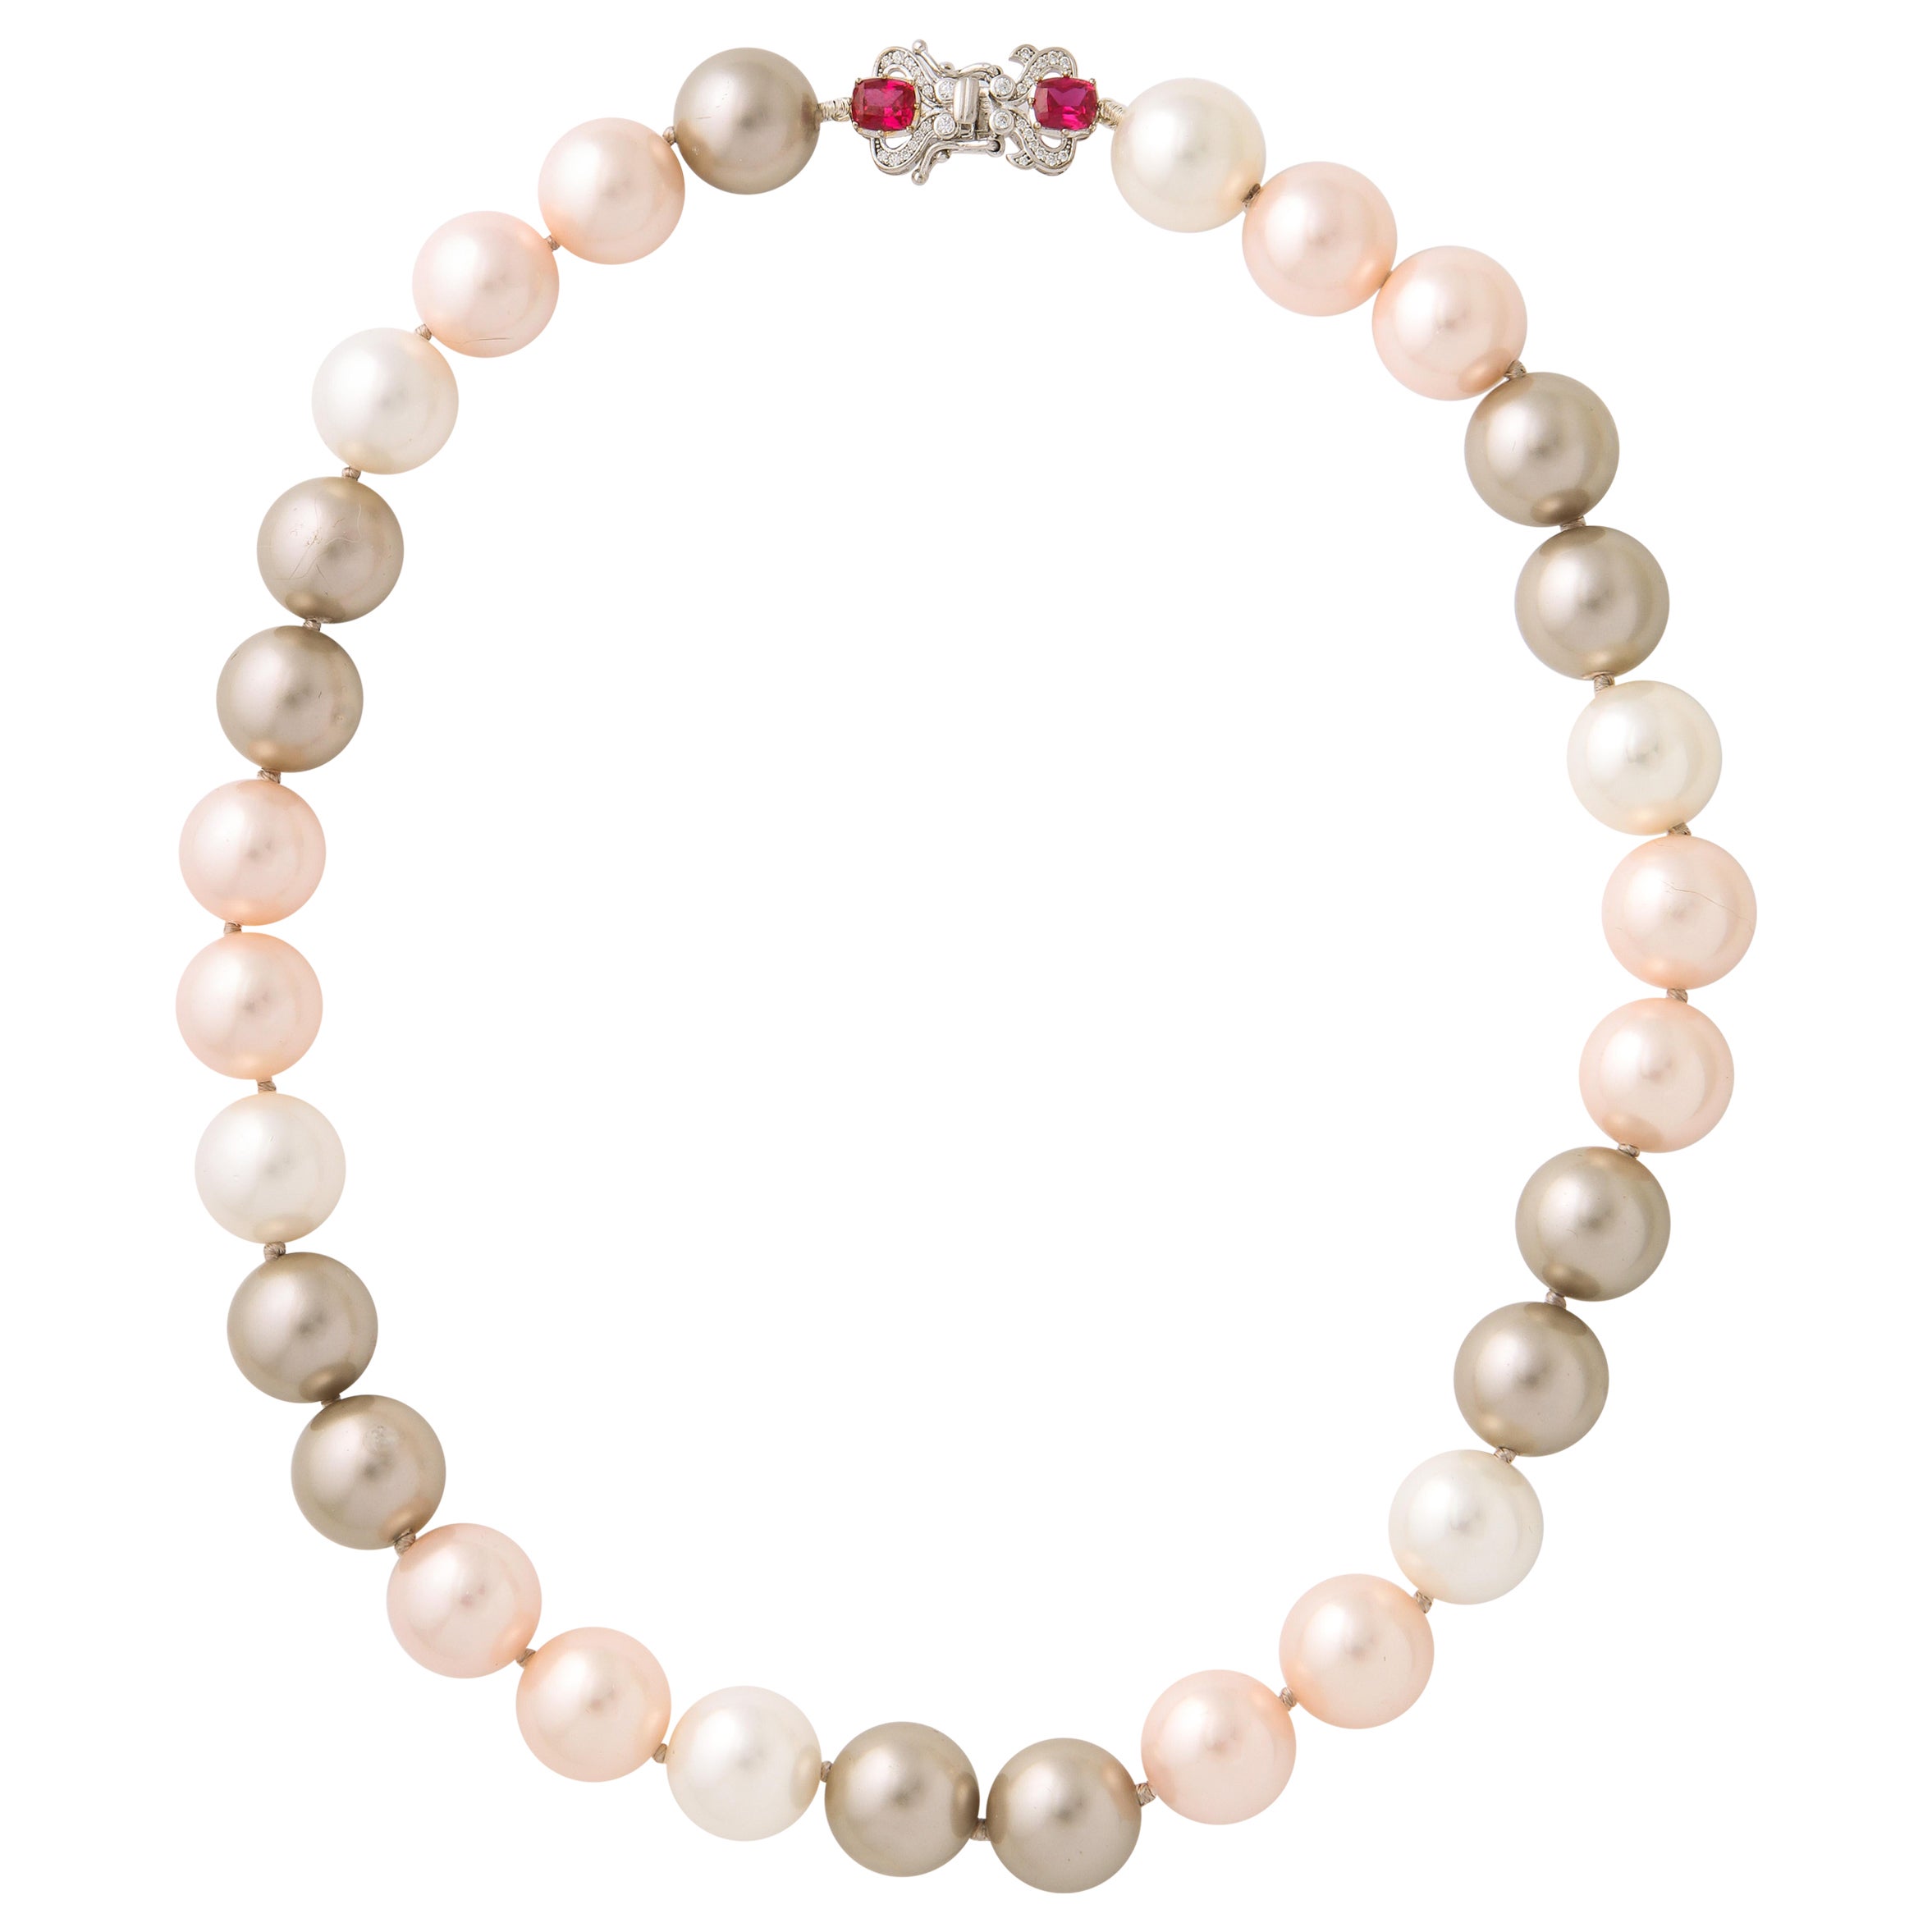 How can I tell if Mikimoto pearls are real?